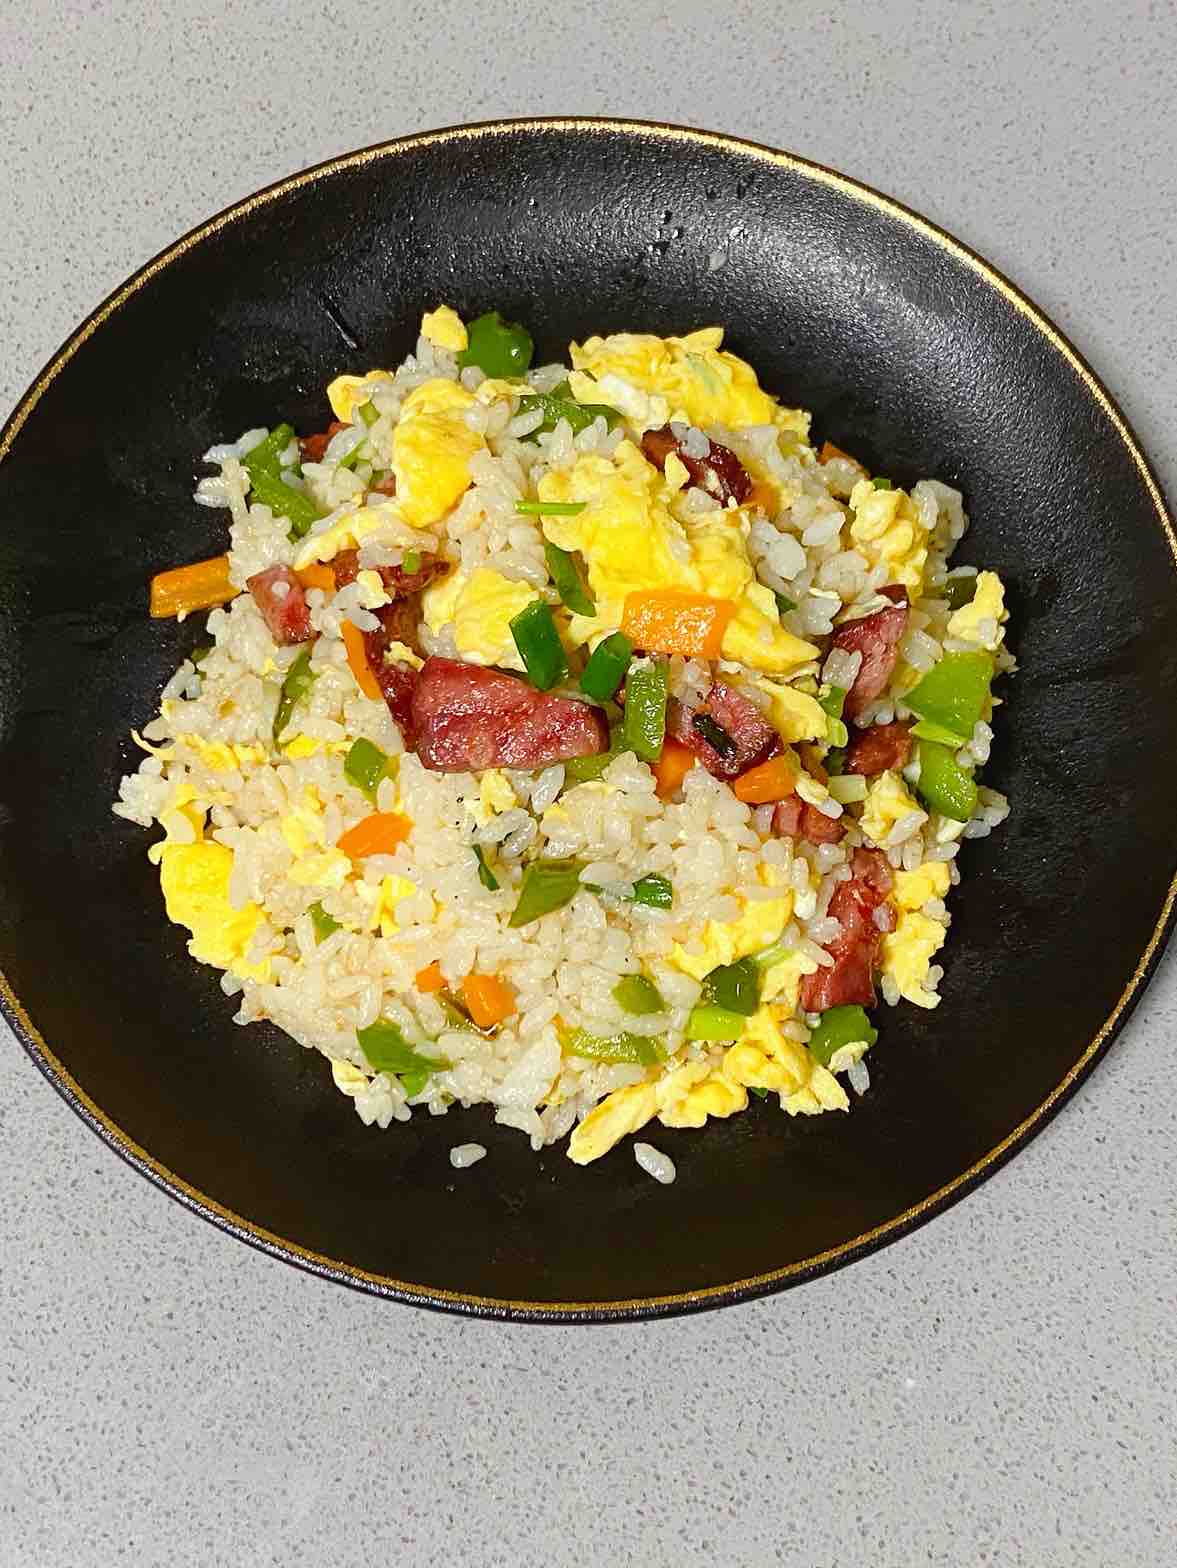 [recipe for Pregnant Women] Fried Rice with Sausage and Seasonal Vegetables, Beautiful in Color and Taste recipe